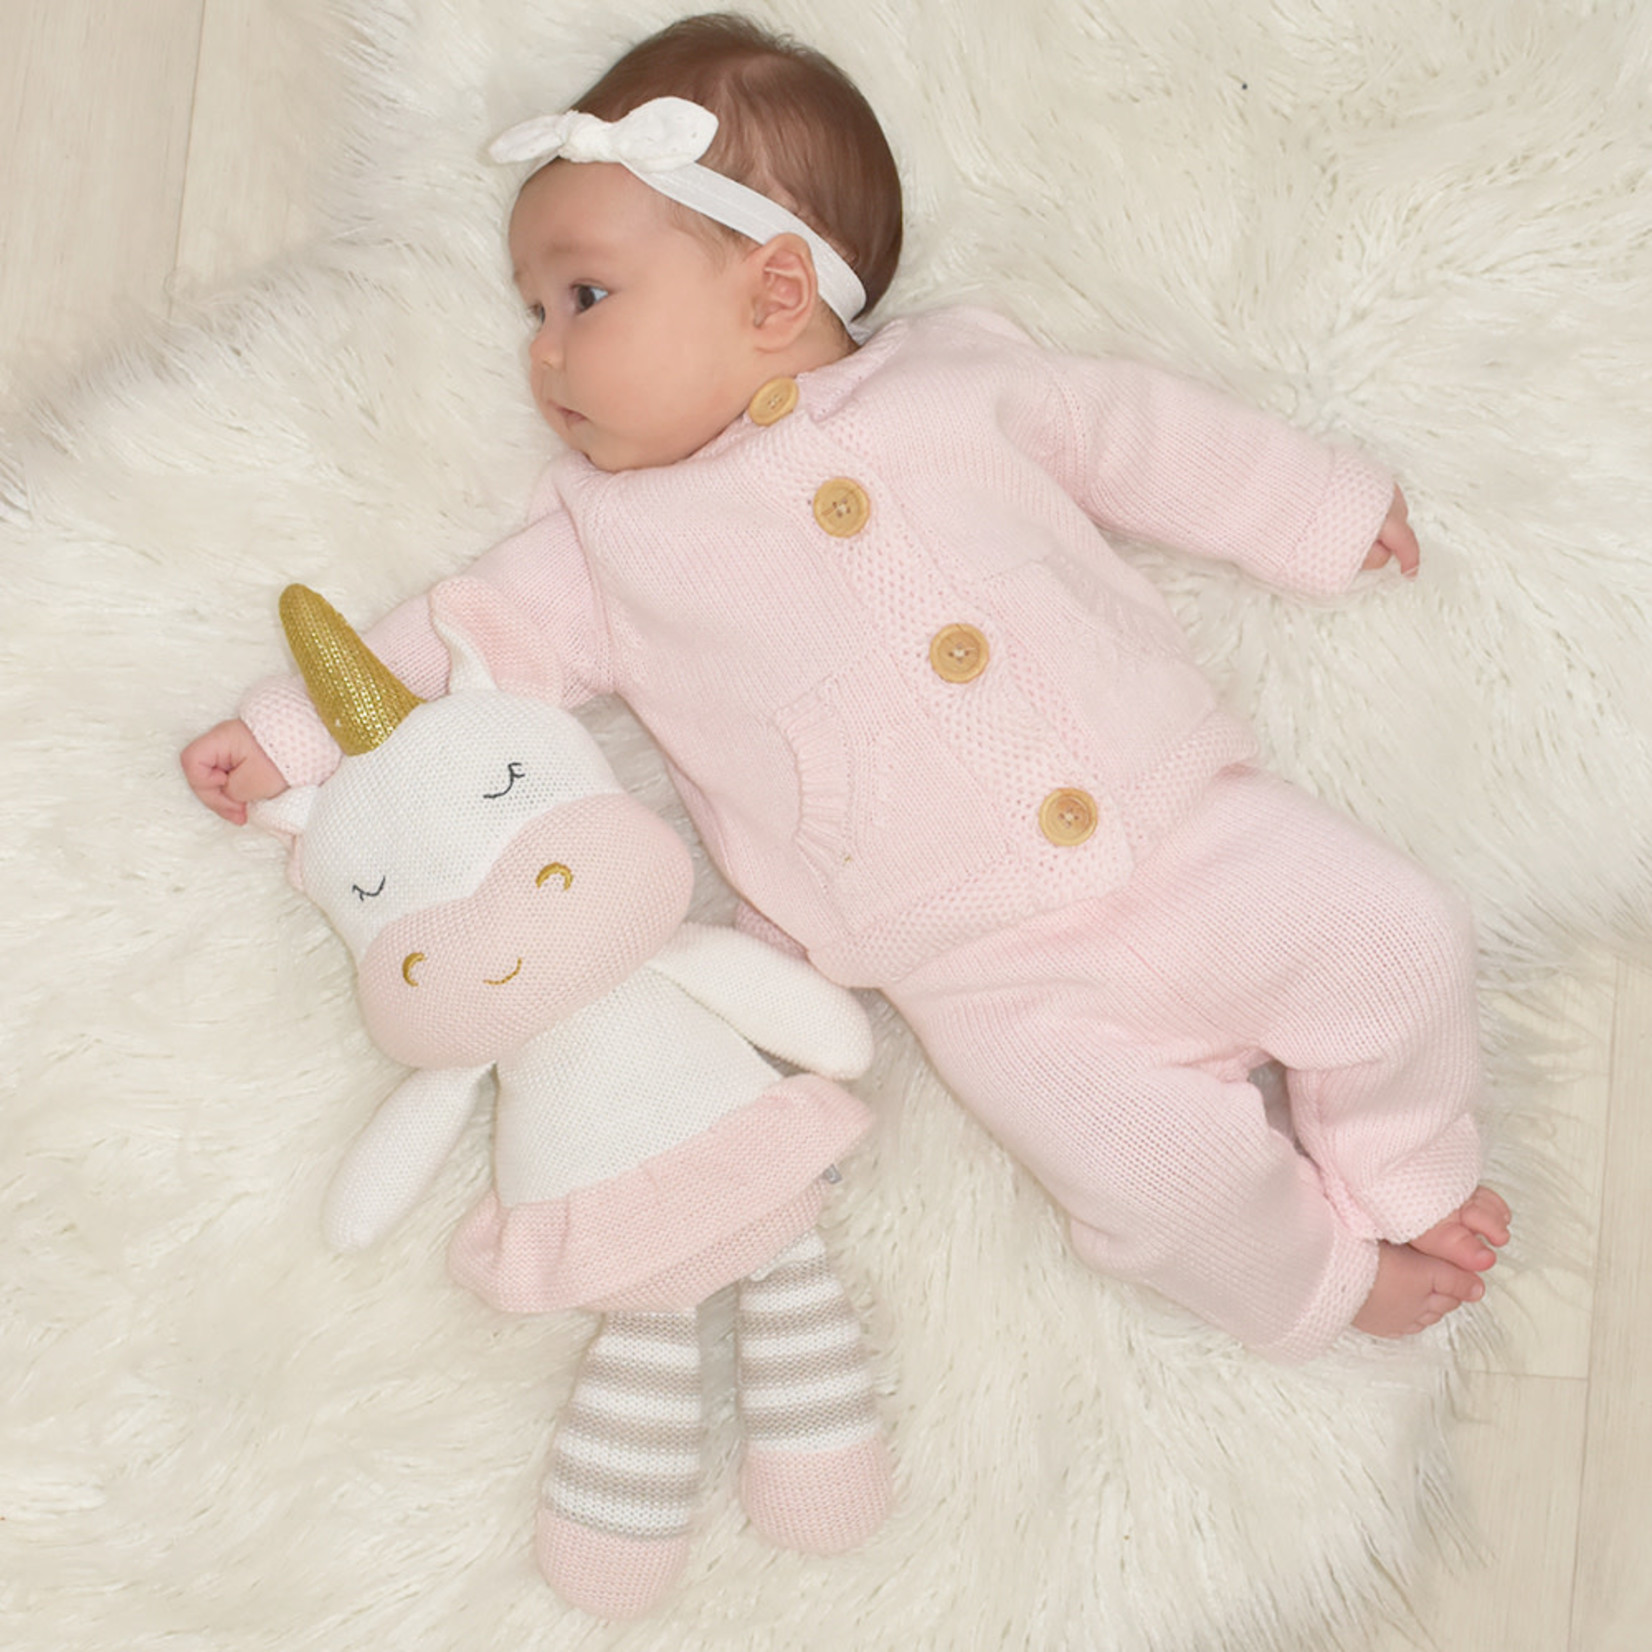 Living Textiles Softie Toy Character Kenzie the Unicorn